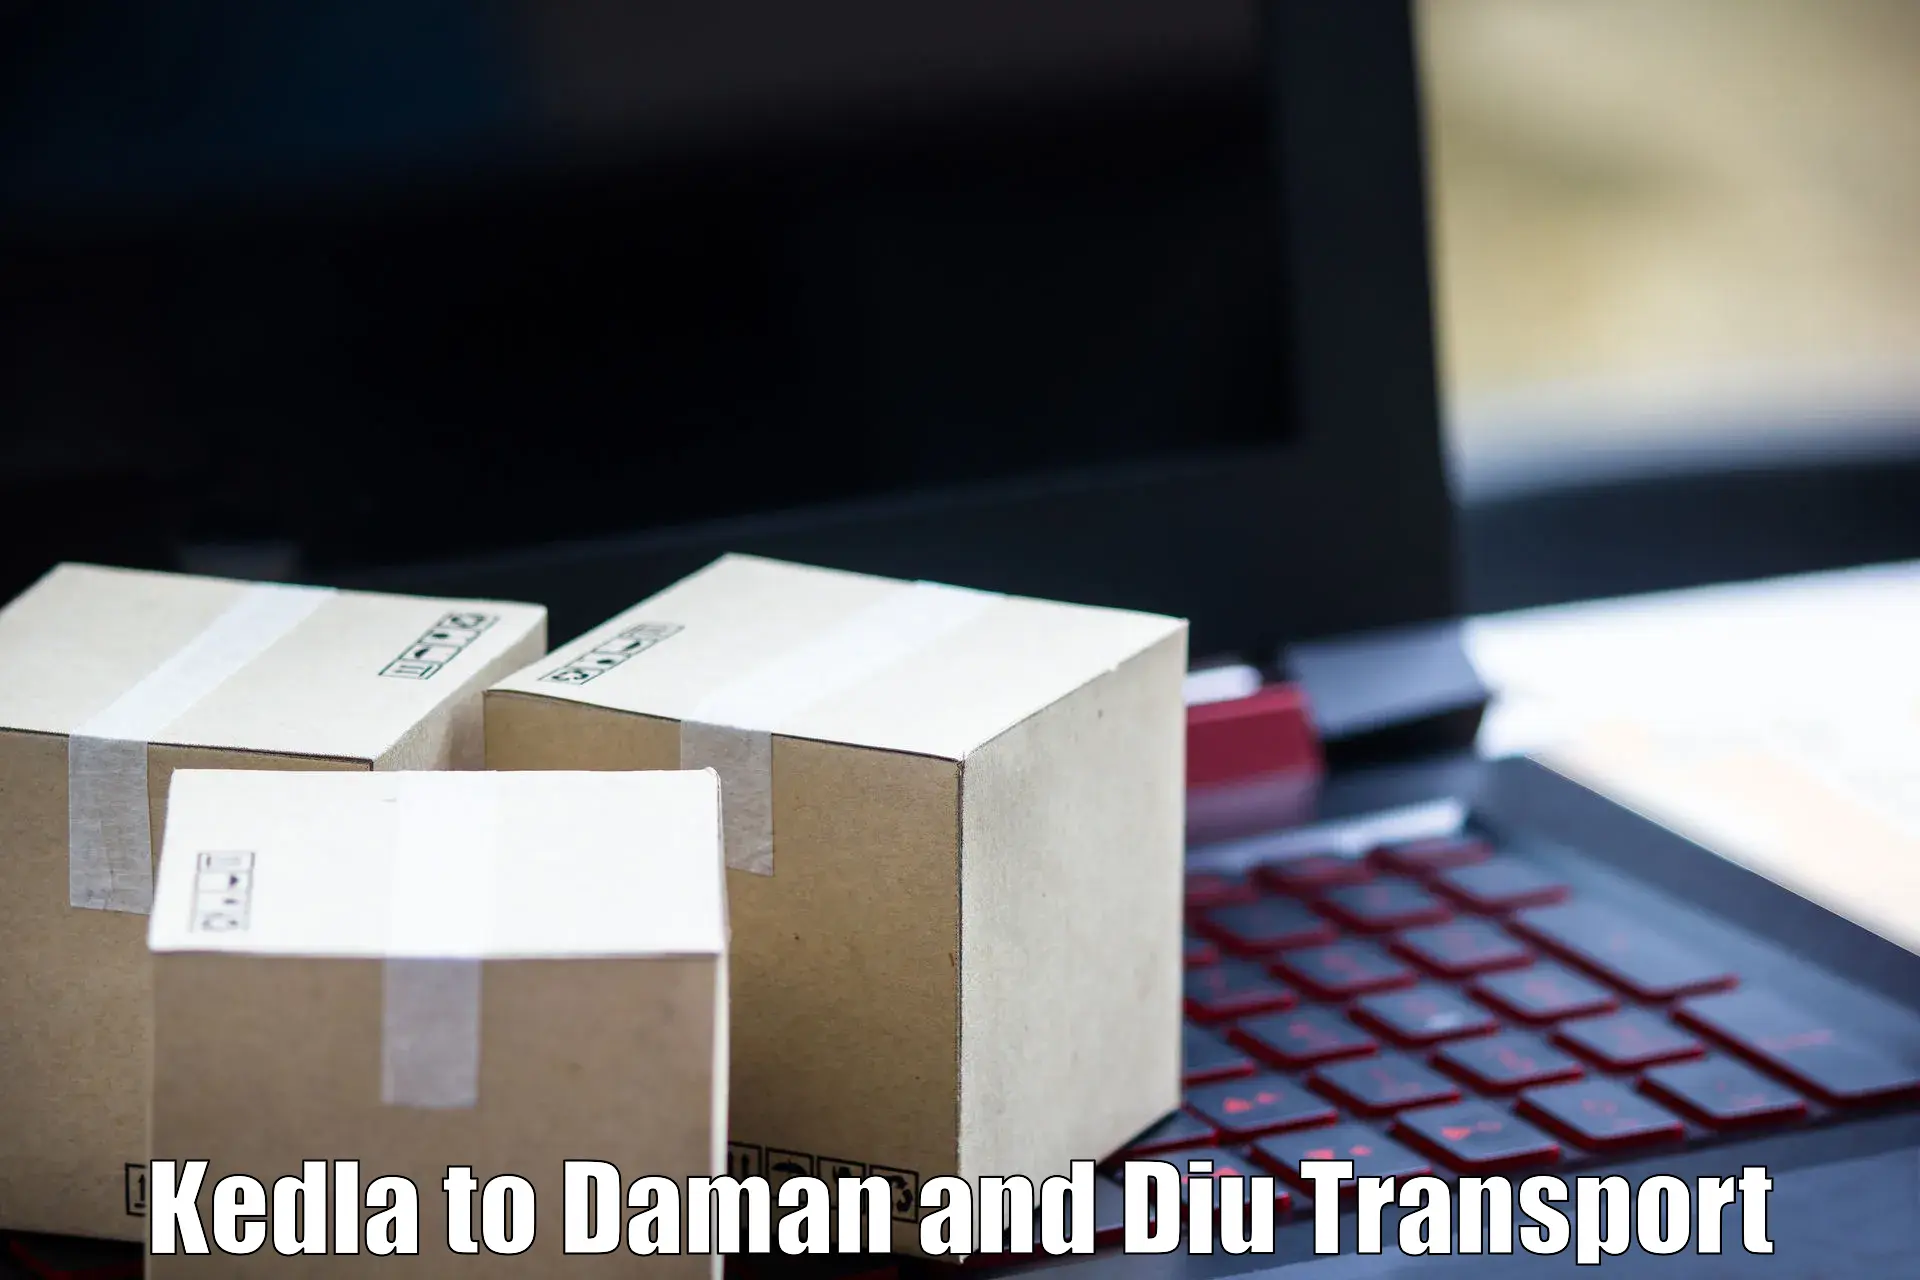 Transport shared services in Kedla to Daman and Diu